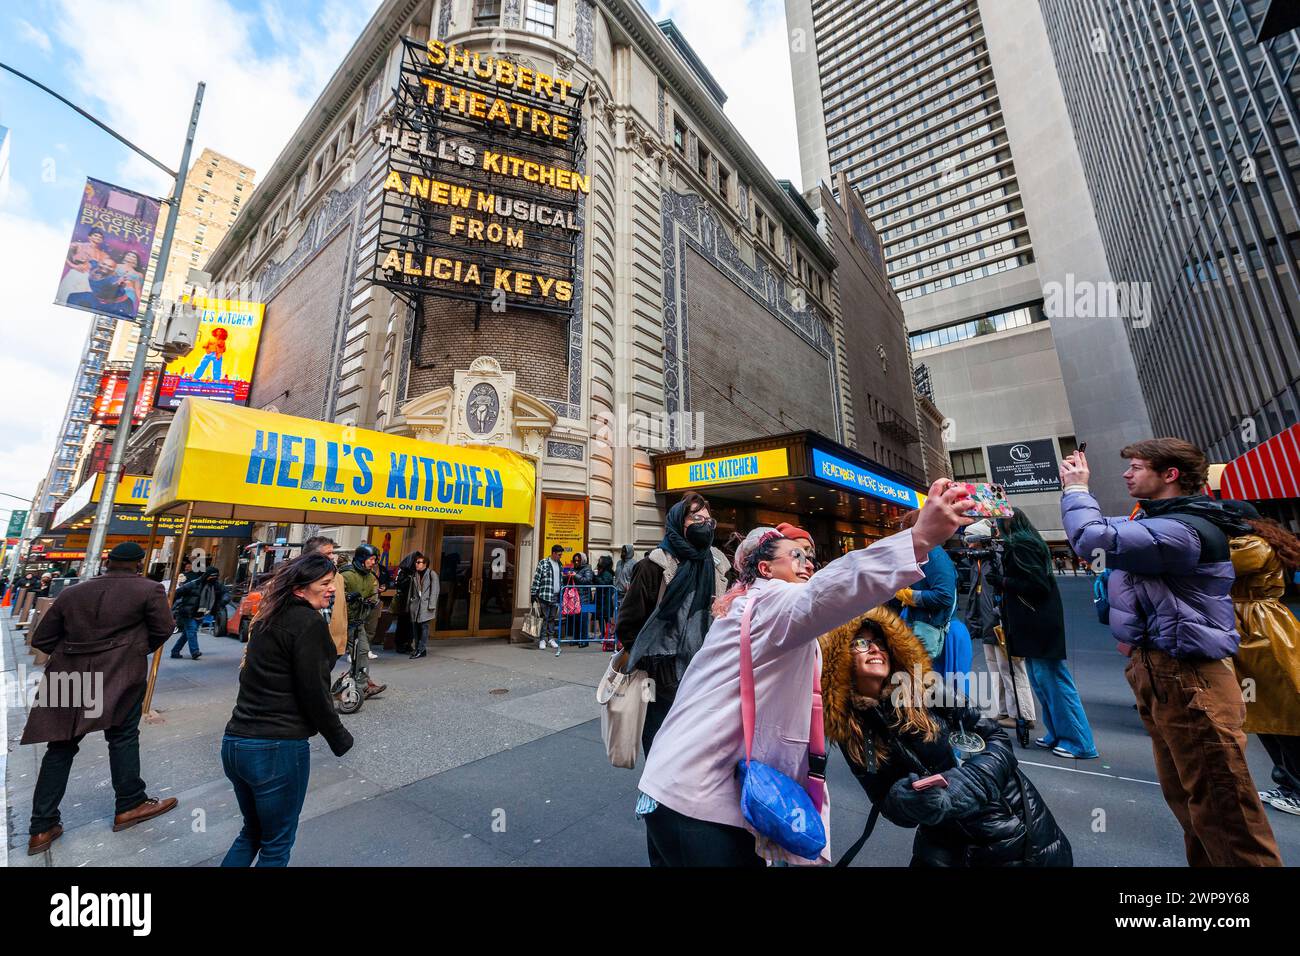 Hordes of fans of Alicia Keys mob the Shubert Theatre in the Broadway Theatre District in New York on the opening day of ticket sales of her biographical musical “Hell’s Kitchen”, seen on Thursday, February 29, 2024.  (© Richard B. Levine) Stock Photo